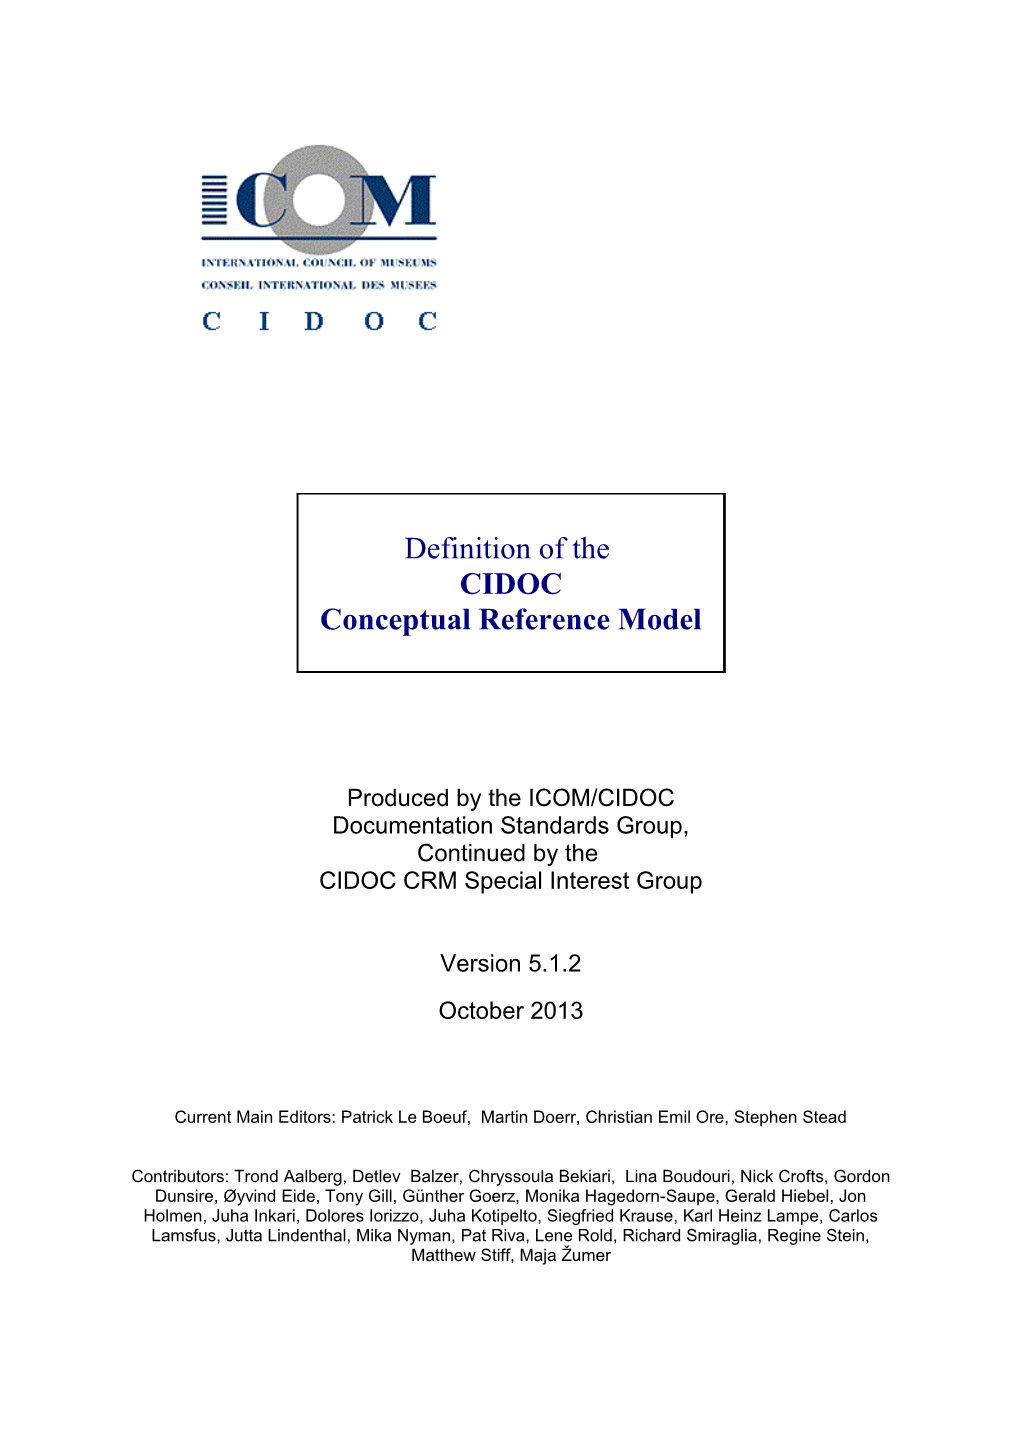 Definition of the CIDOC Conceptual Reference Model